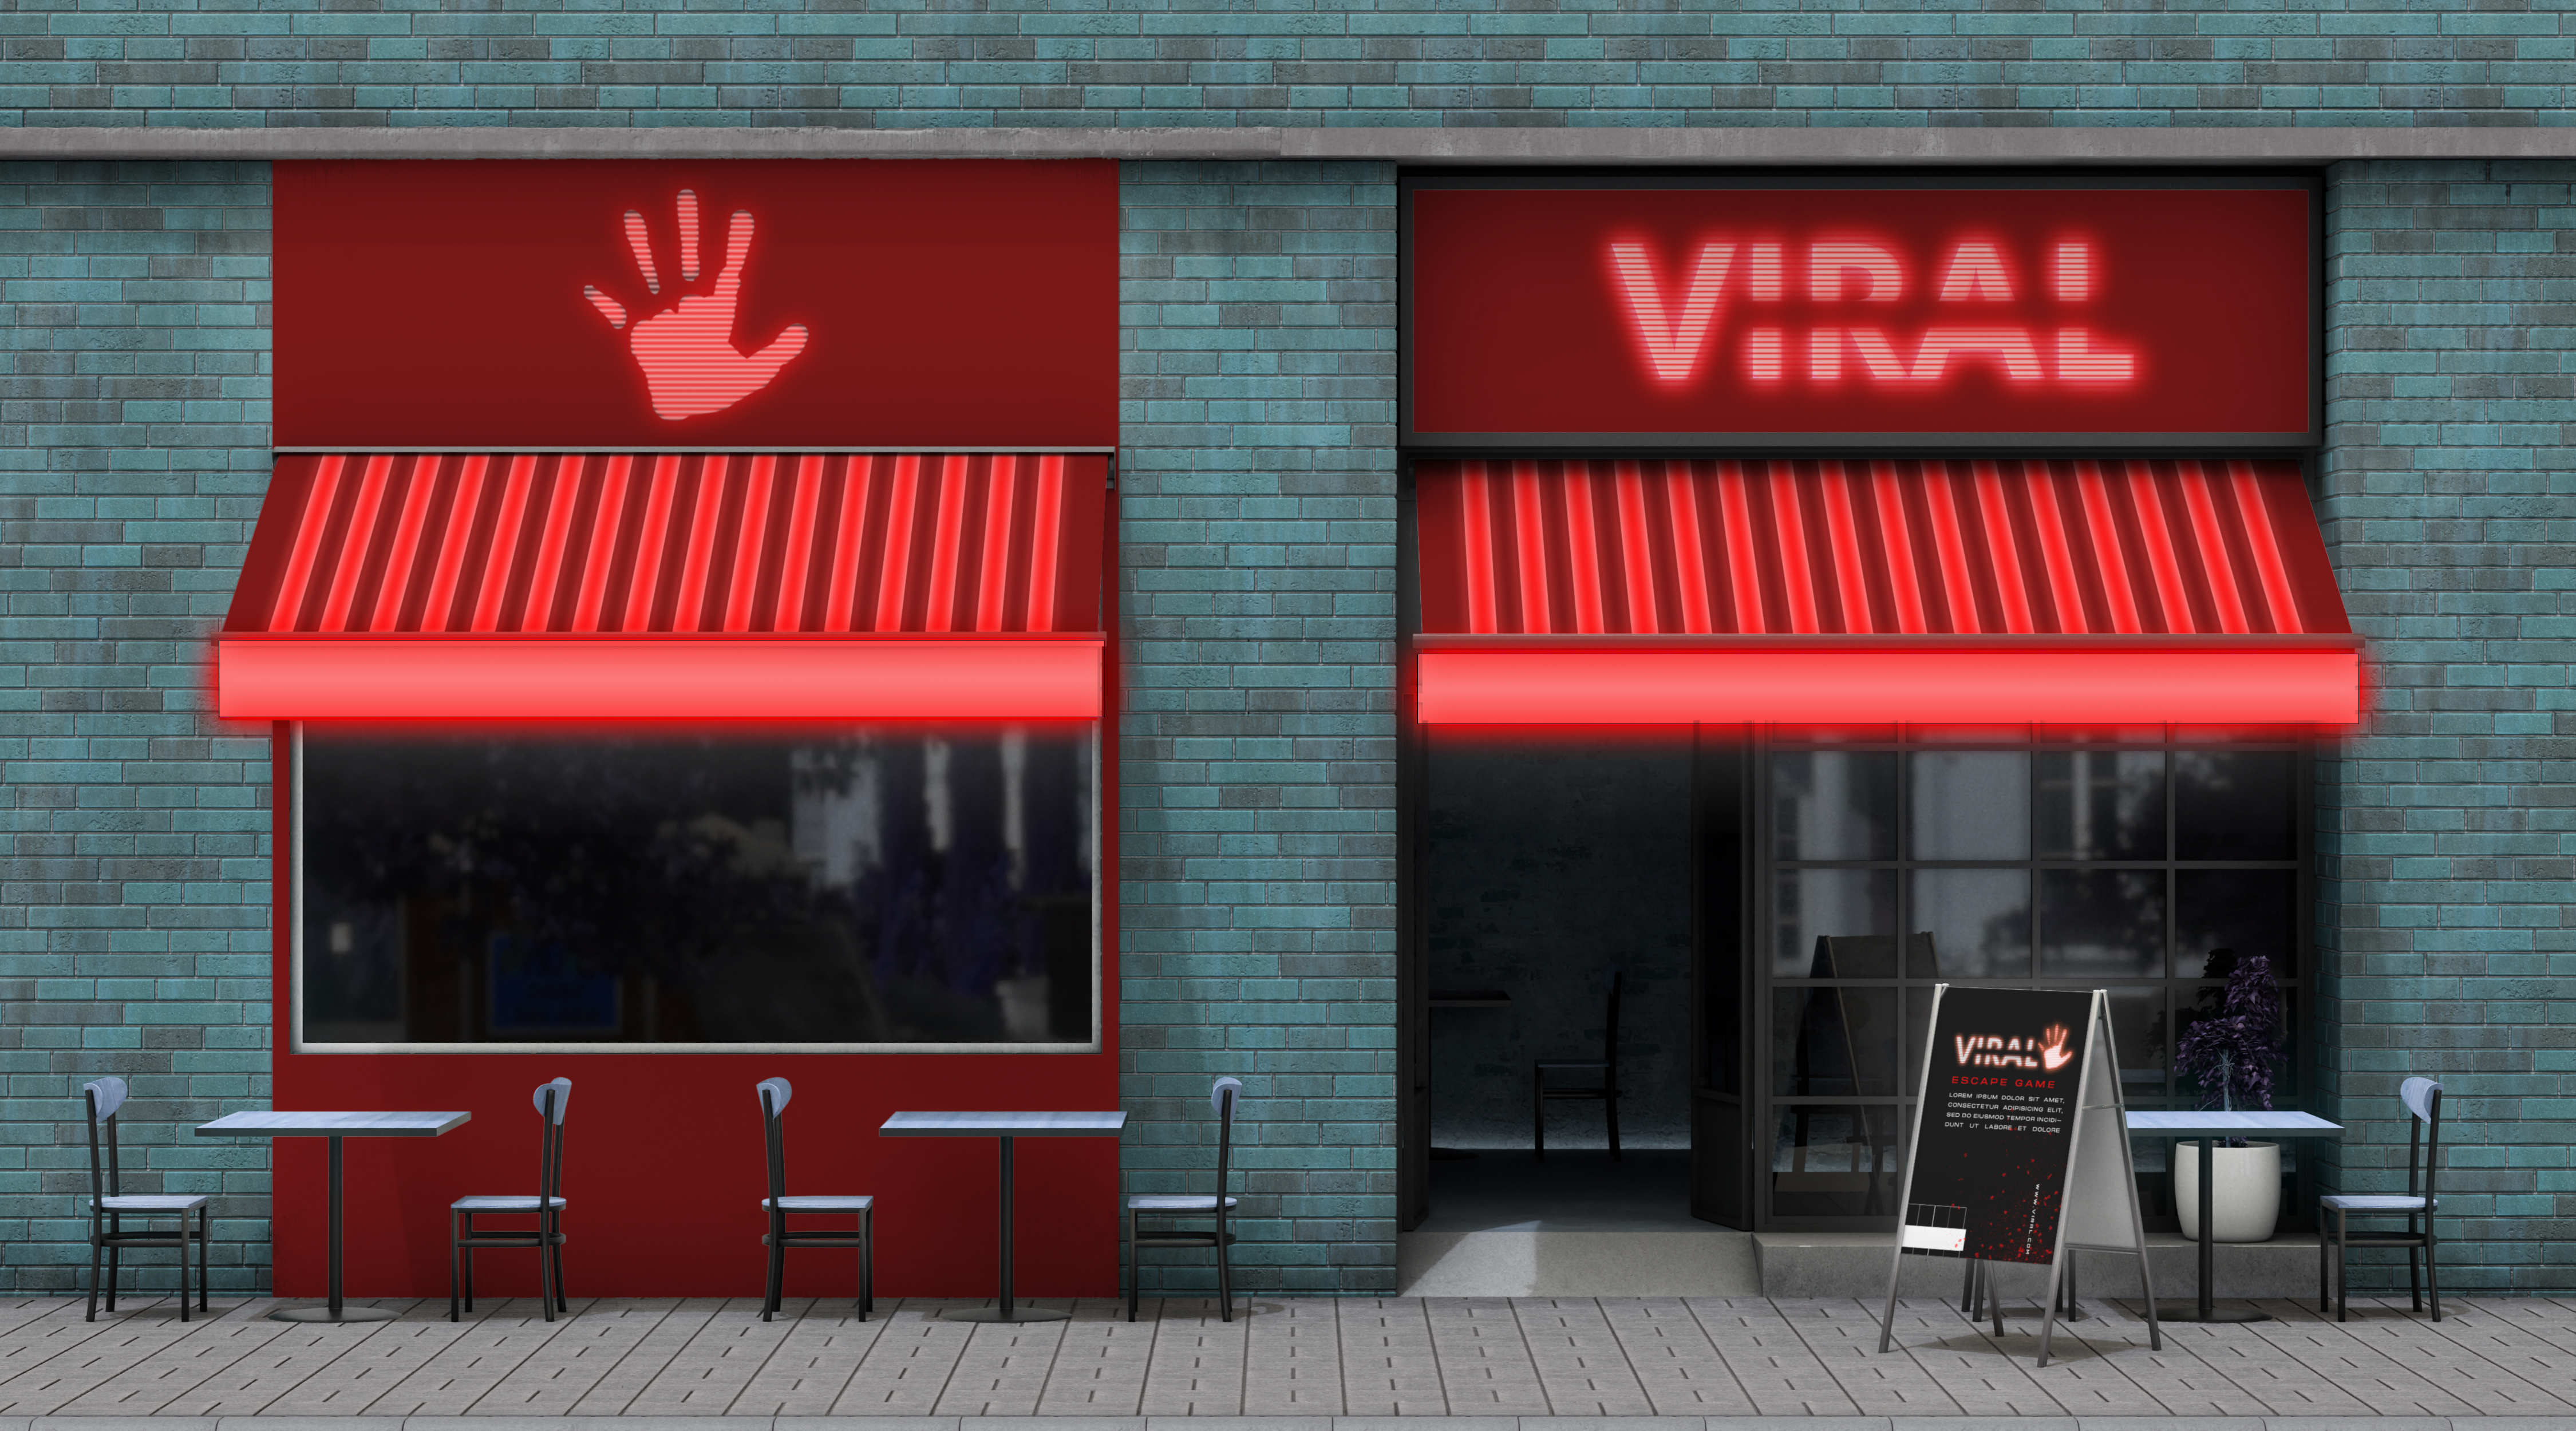 Promotional render of a popup store